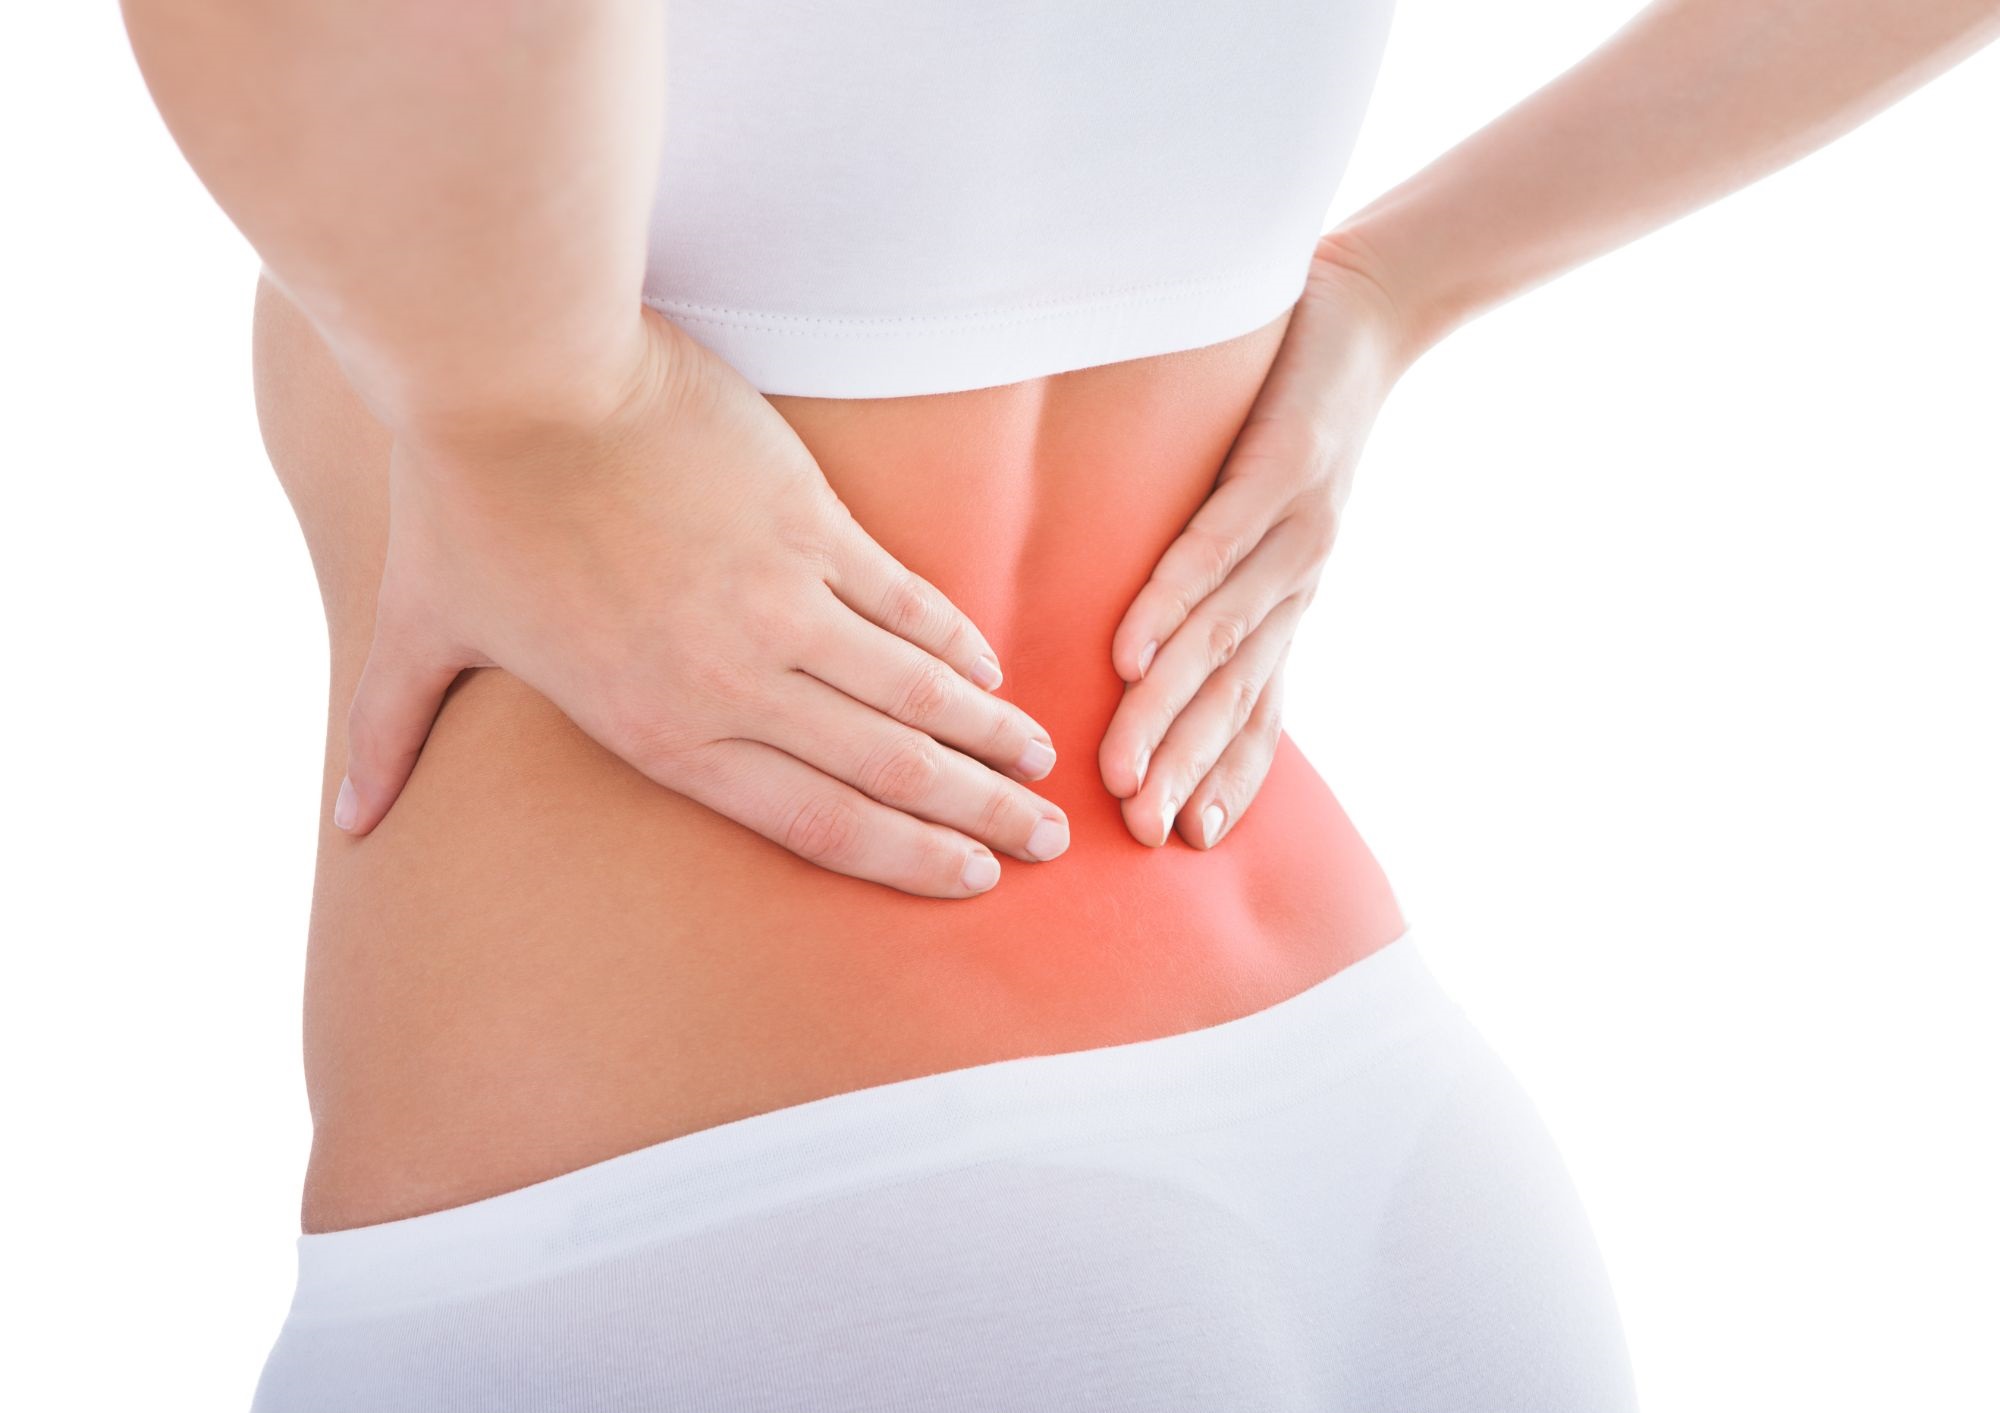 How To Heal Lower Back Pain And Get You Back To Activities Fast?